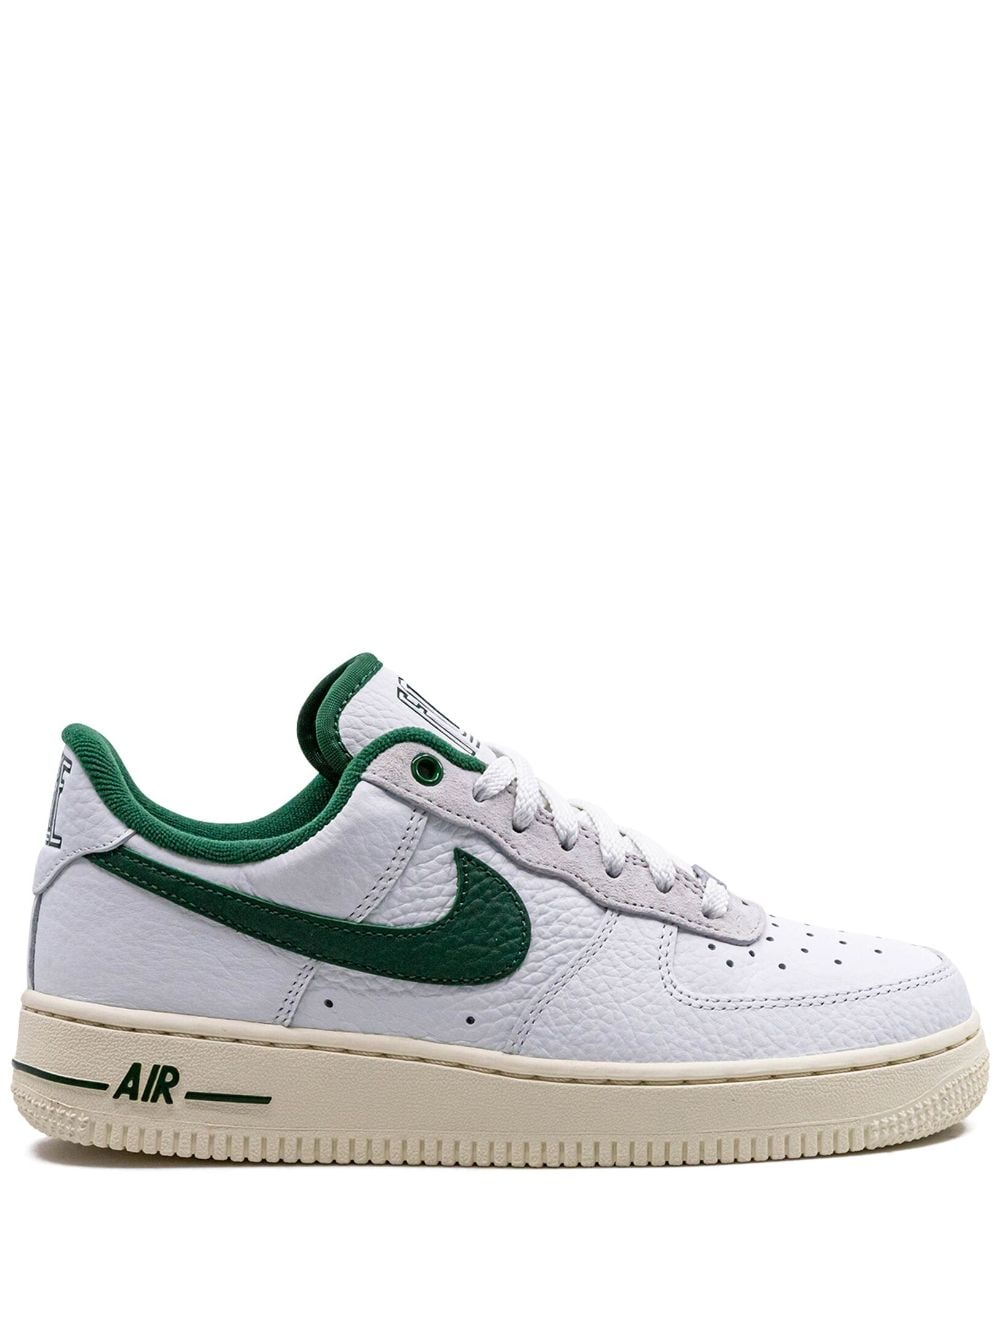 Nike Air Force 1 Low '07 Lx 